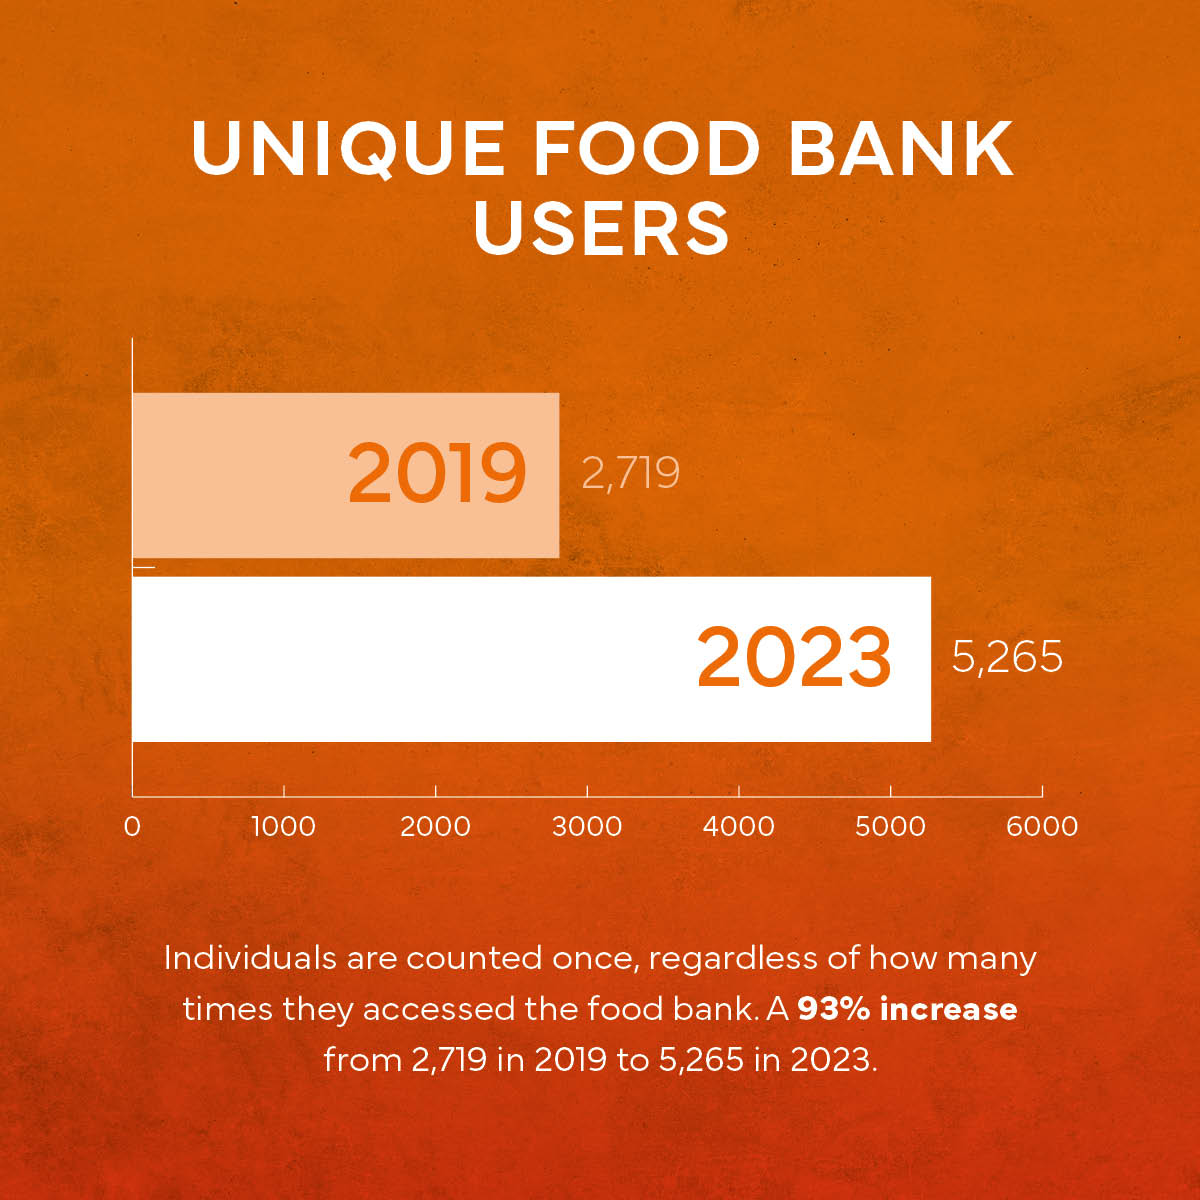 Infographic showing the Unique Food Bank Users, A 943% increase from 2,719 in 2019 to 5,265 in 2023.